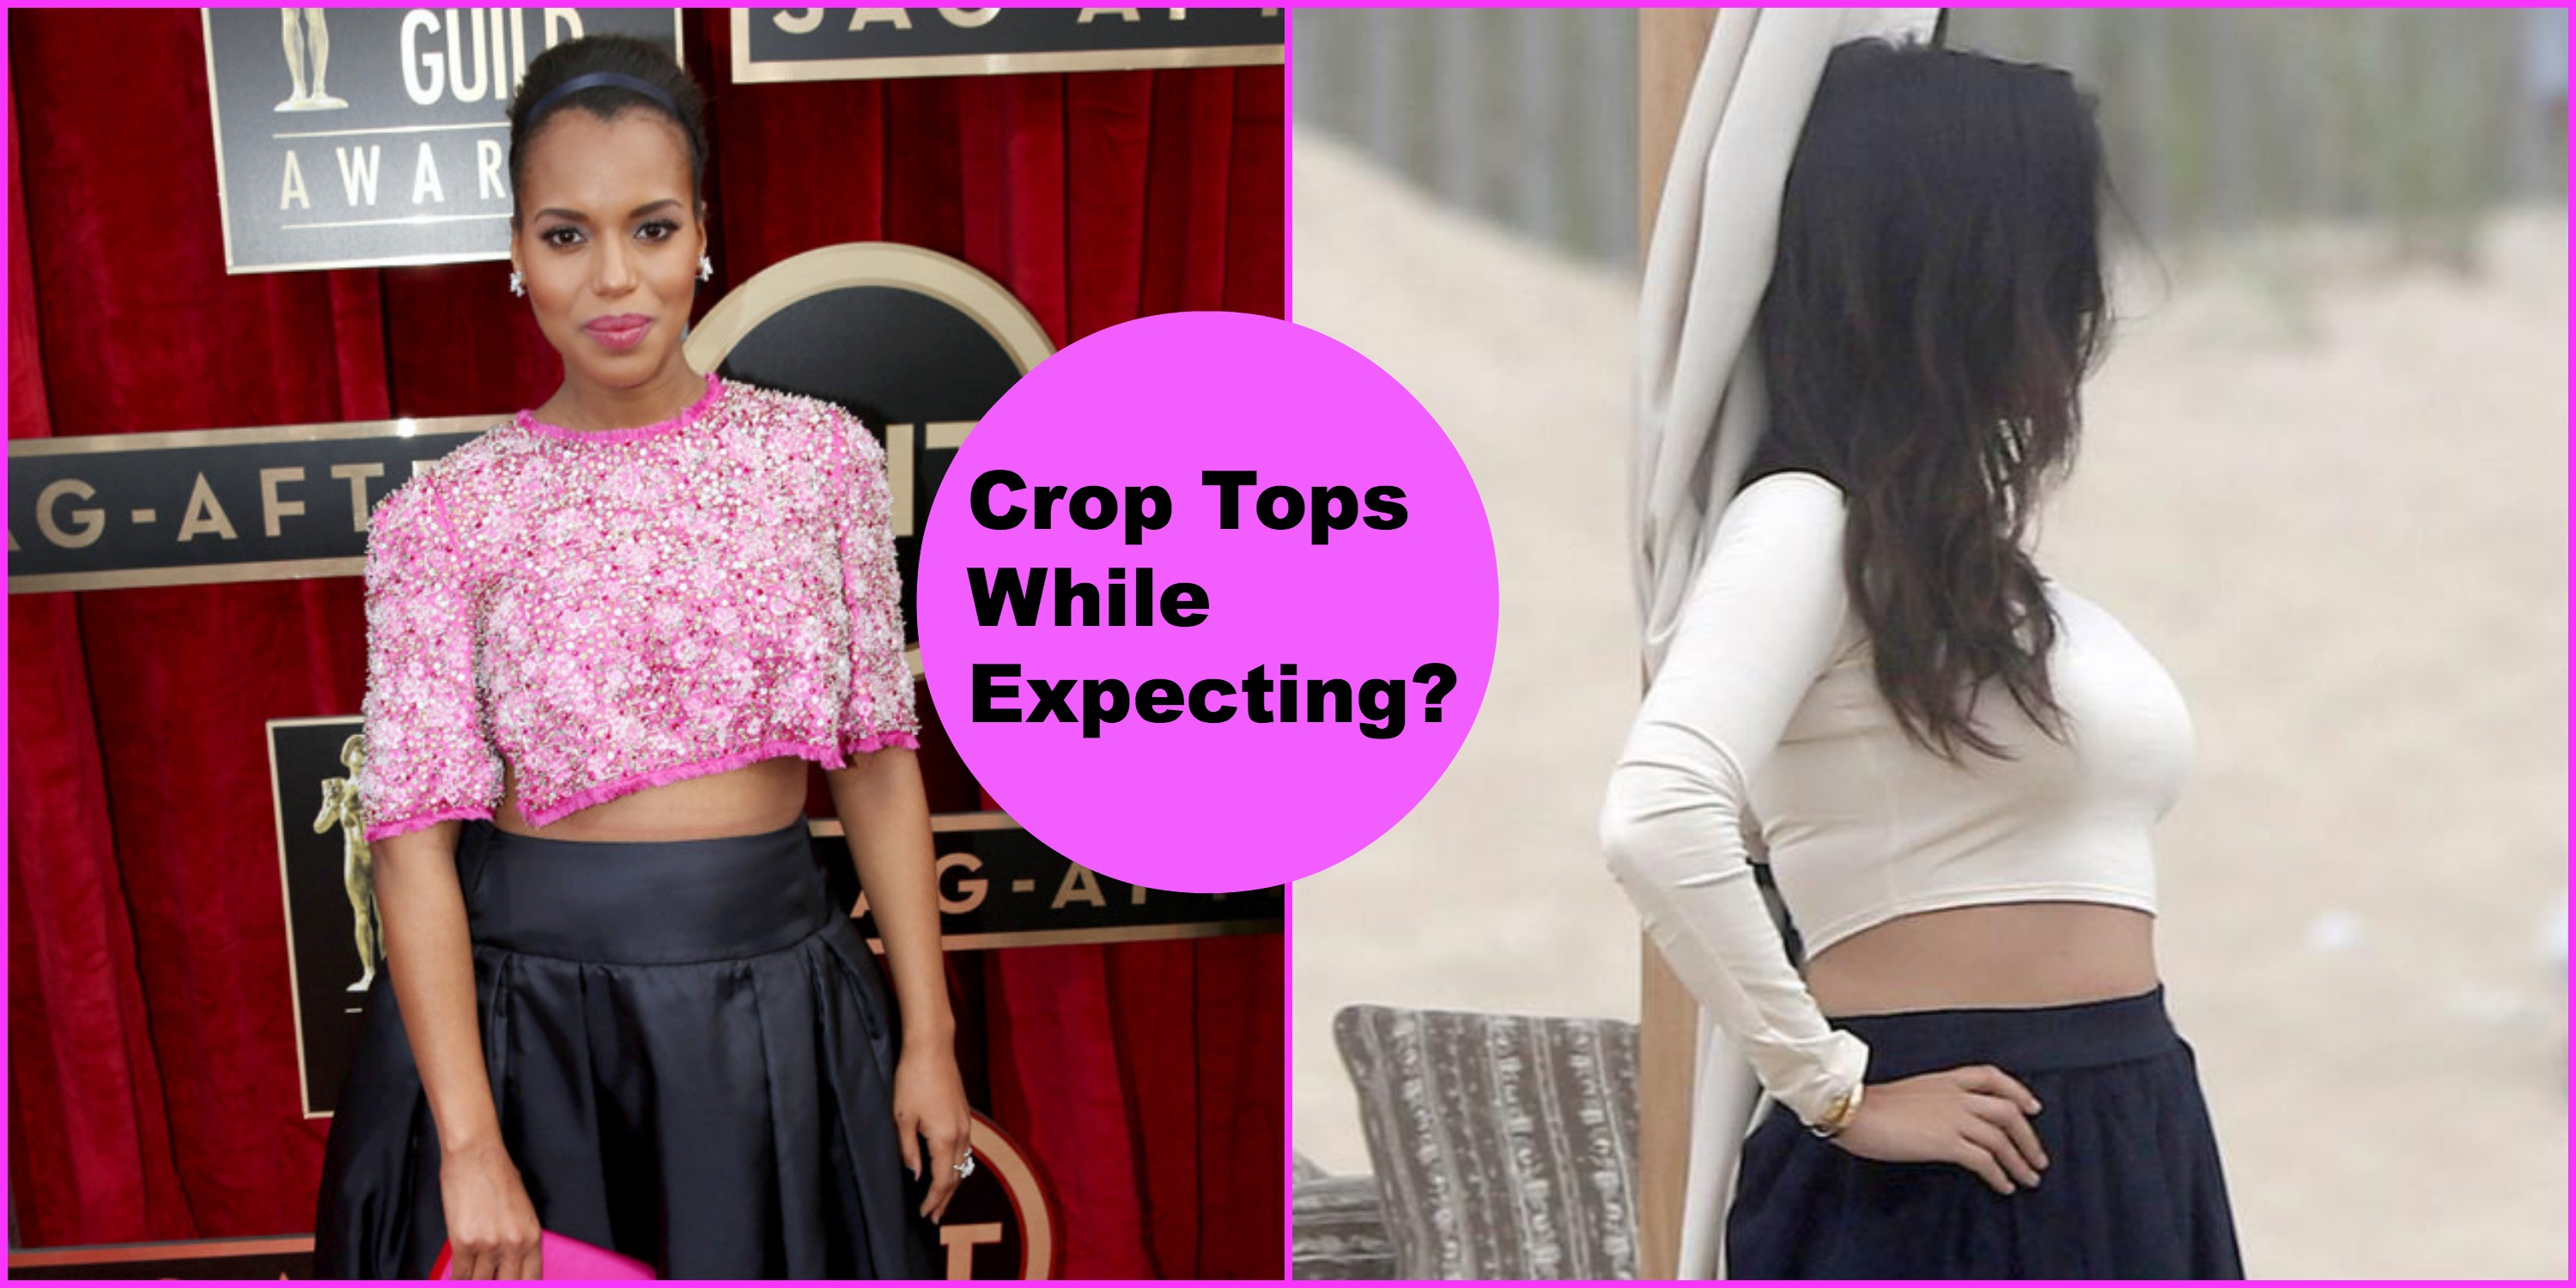 Are Crop Tops The New Pregnancy Fashion Staple?